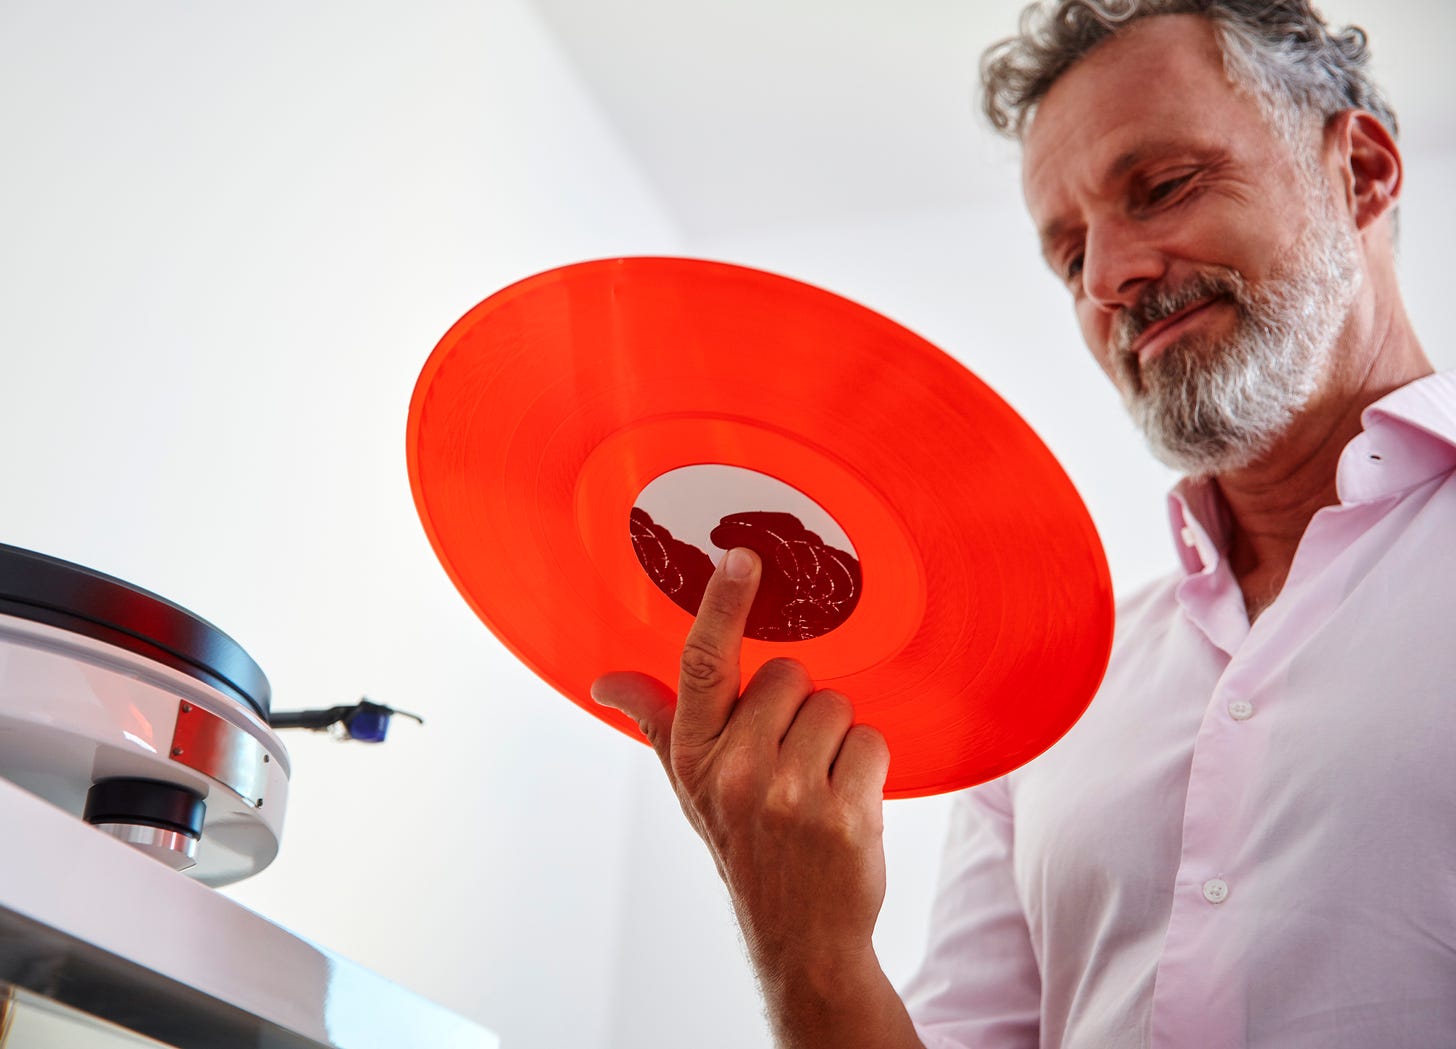 A man holds a red vinyl record.